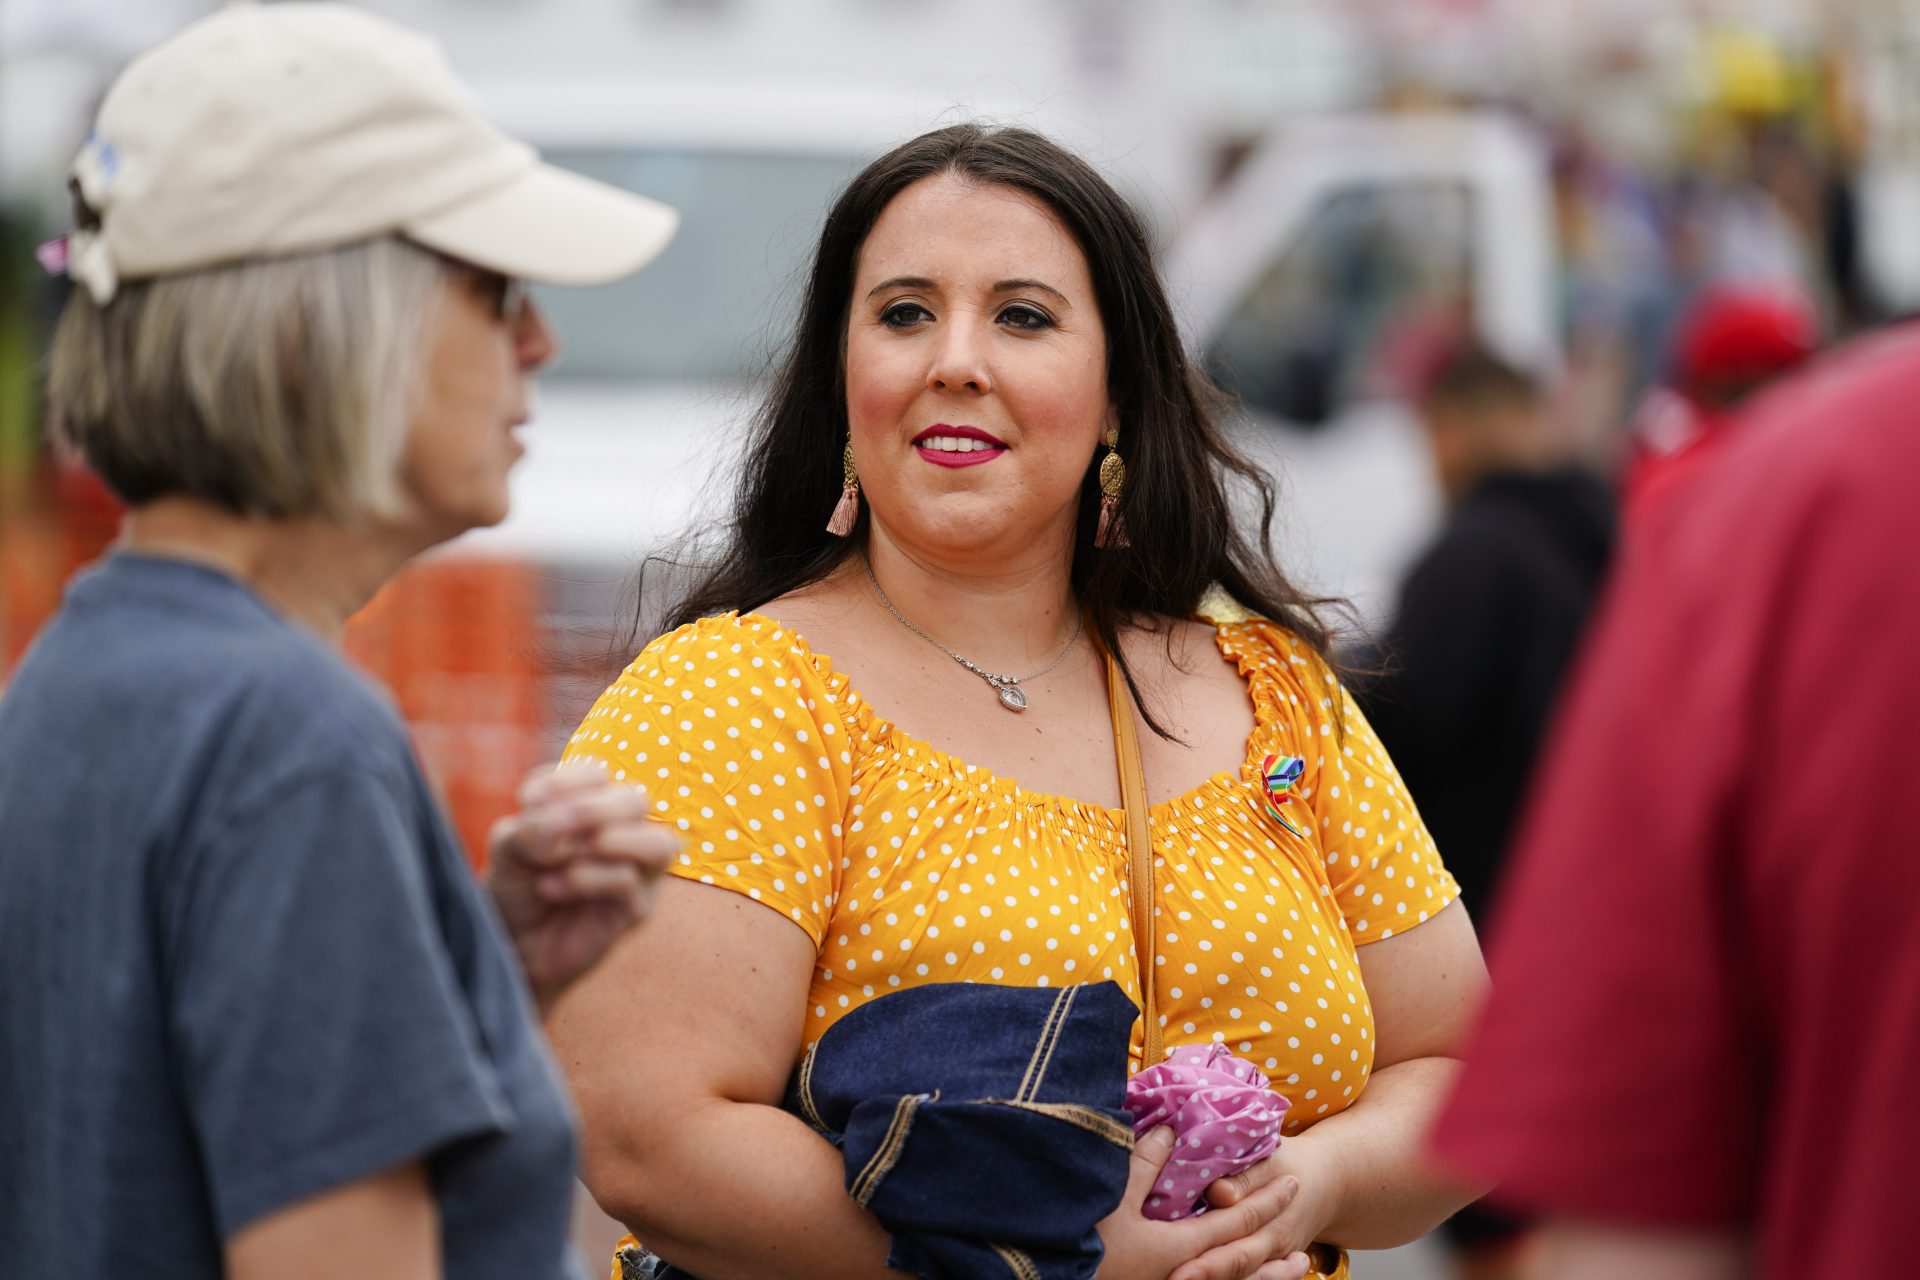 Alicia Duque, a 35-year-old mother of three and volunteer organizer for the progressive group, Action Together listens to Claudia Glennan at the Edwardsville Pierogi Festival in Edwardsville, Pa., Friday, June 11, 2021.